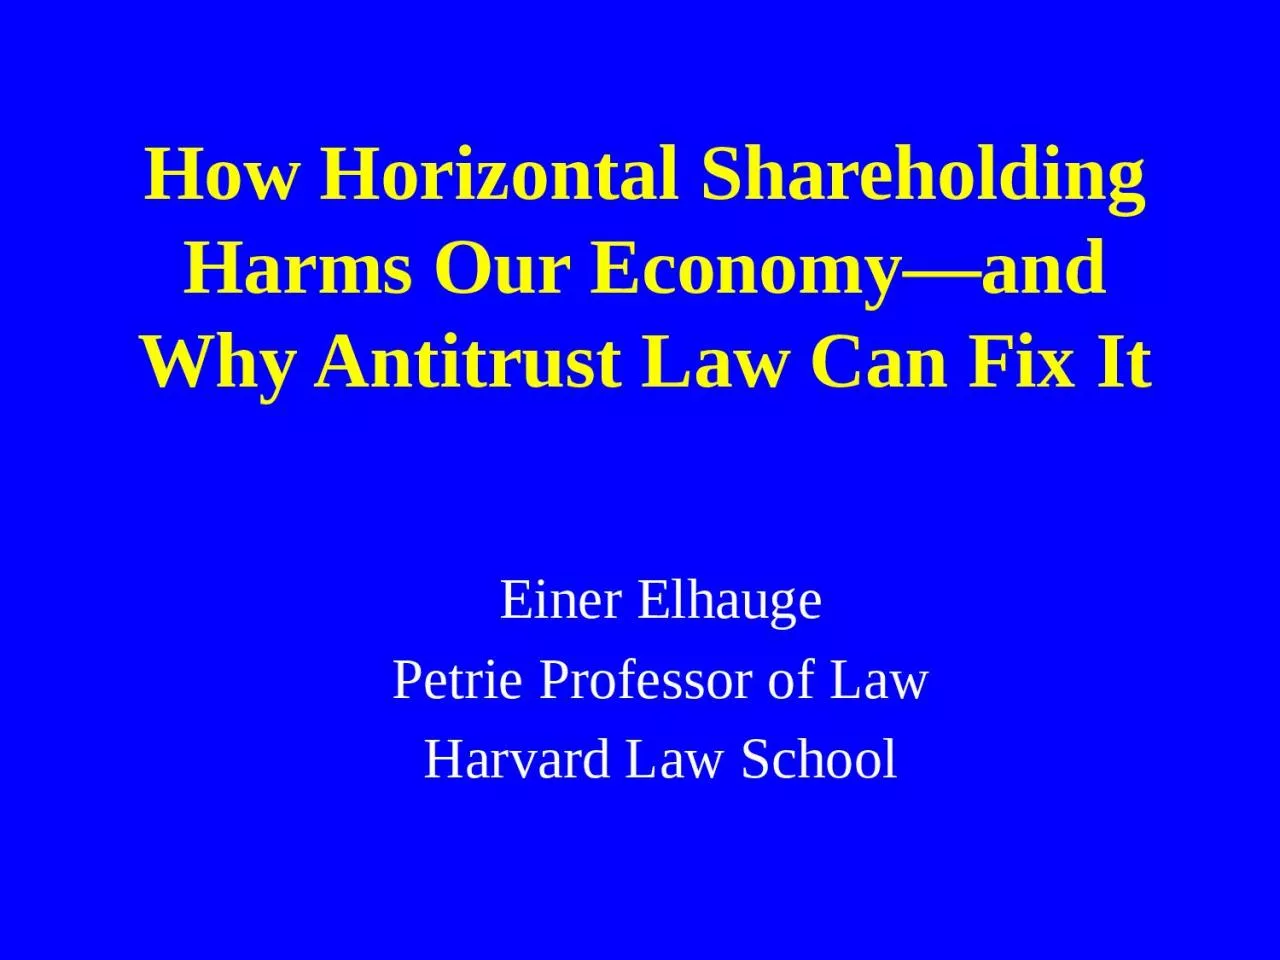 How Horizontal Shareholding Harms Our Economy—and Why Antitrust Law Can Fix It